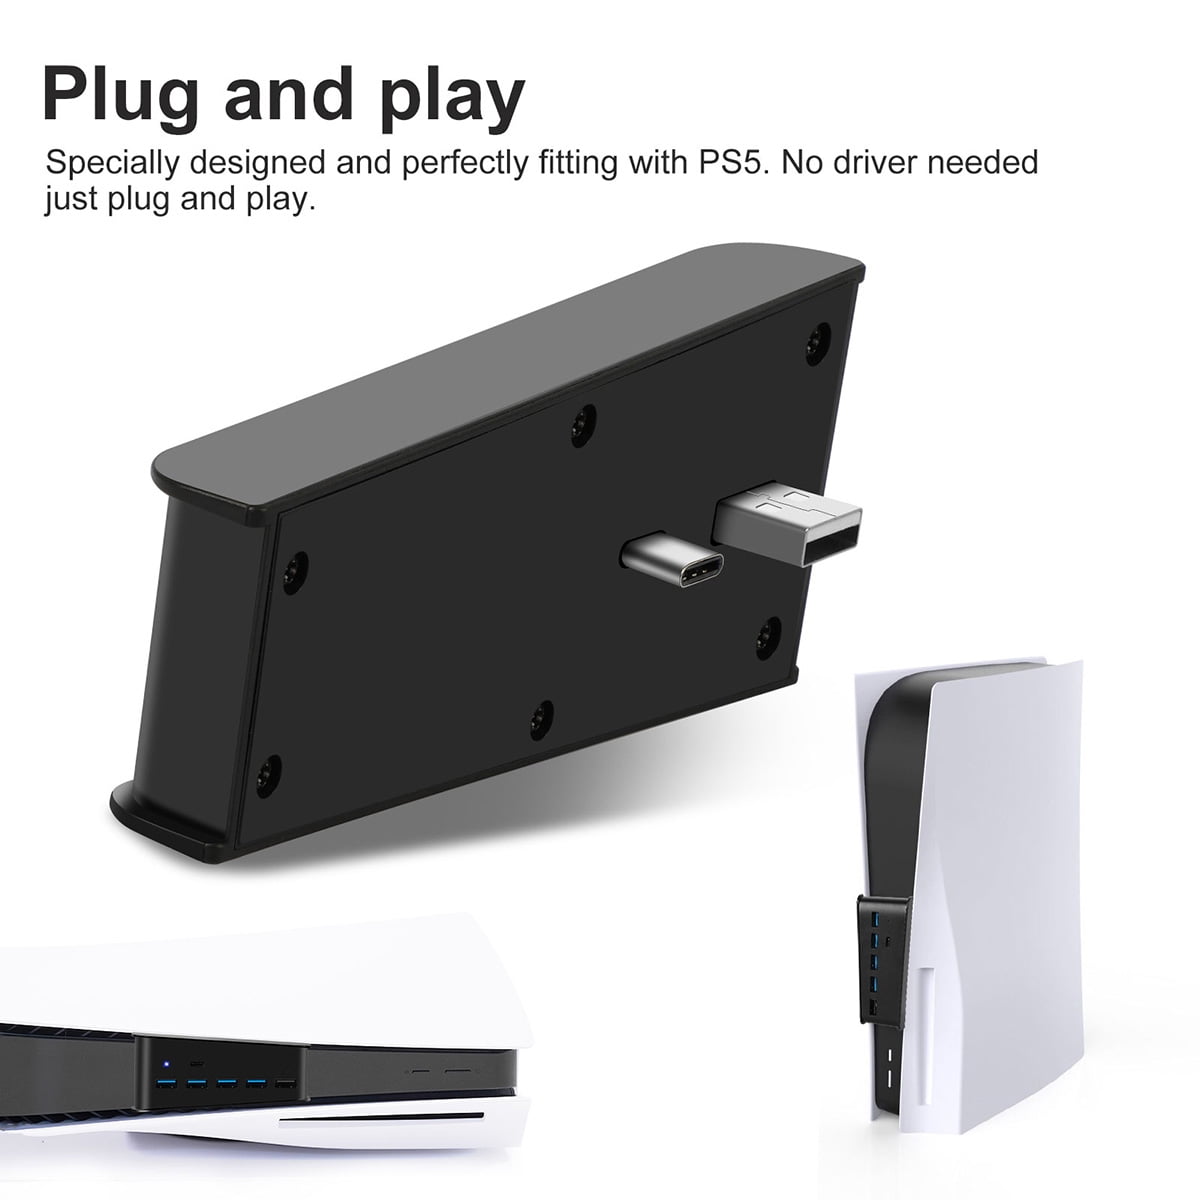 Hi, will this work with my g29? My ps5 front usb-a port is playing up so  I'm trying to find a temp fix. The hub will go into the front usb c